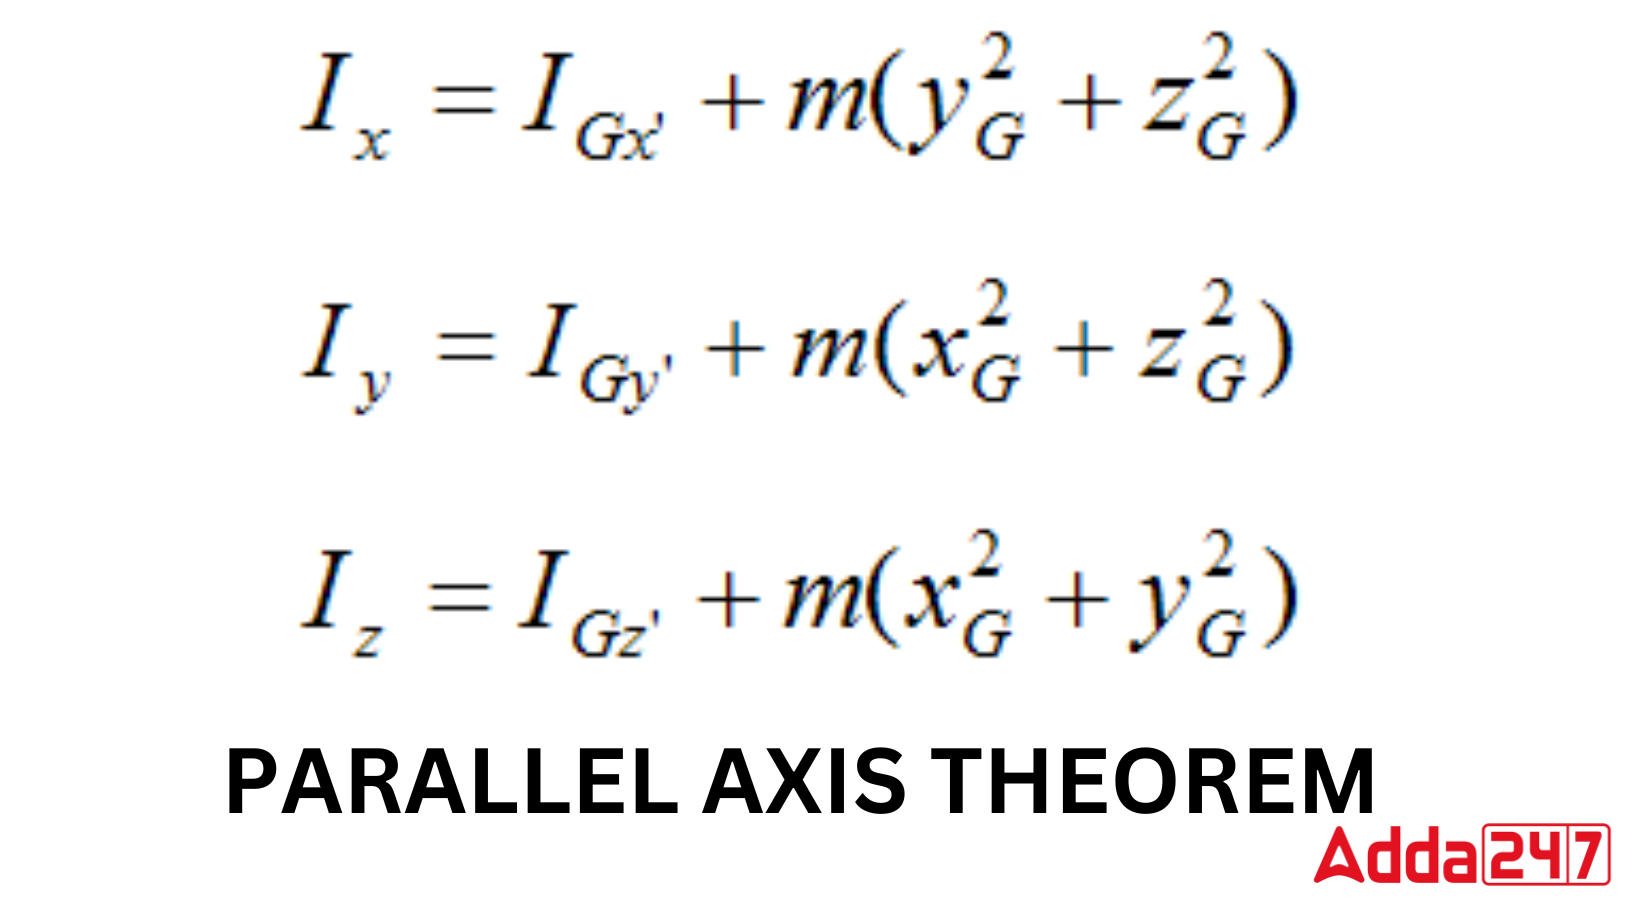 PARALLEL AXIS THEOREM